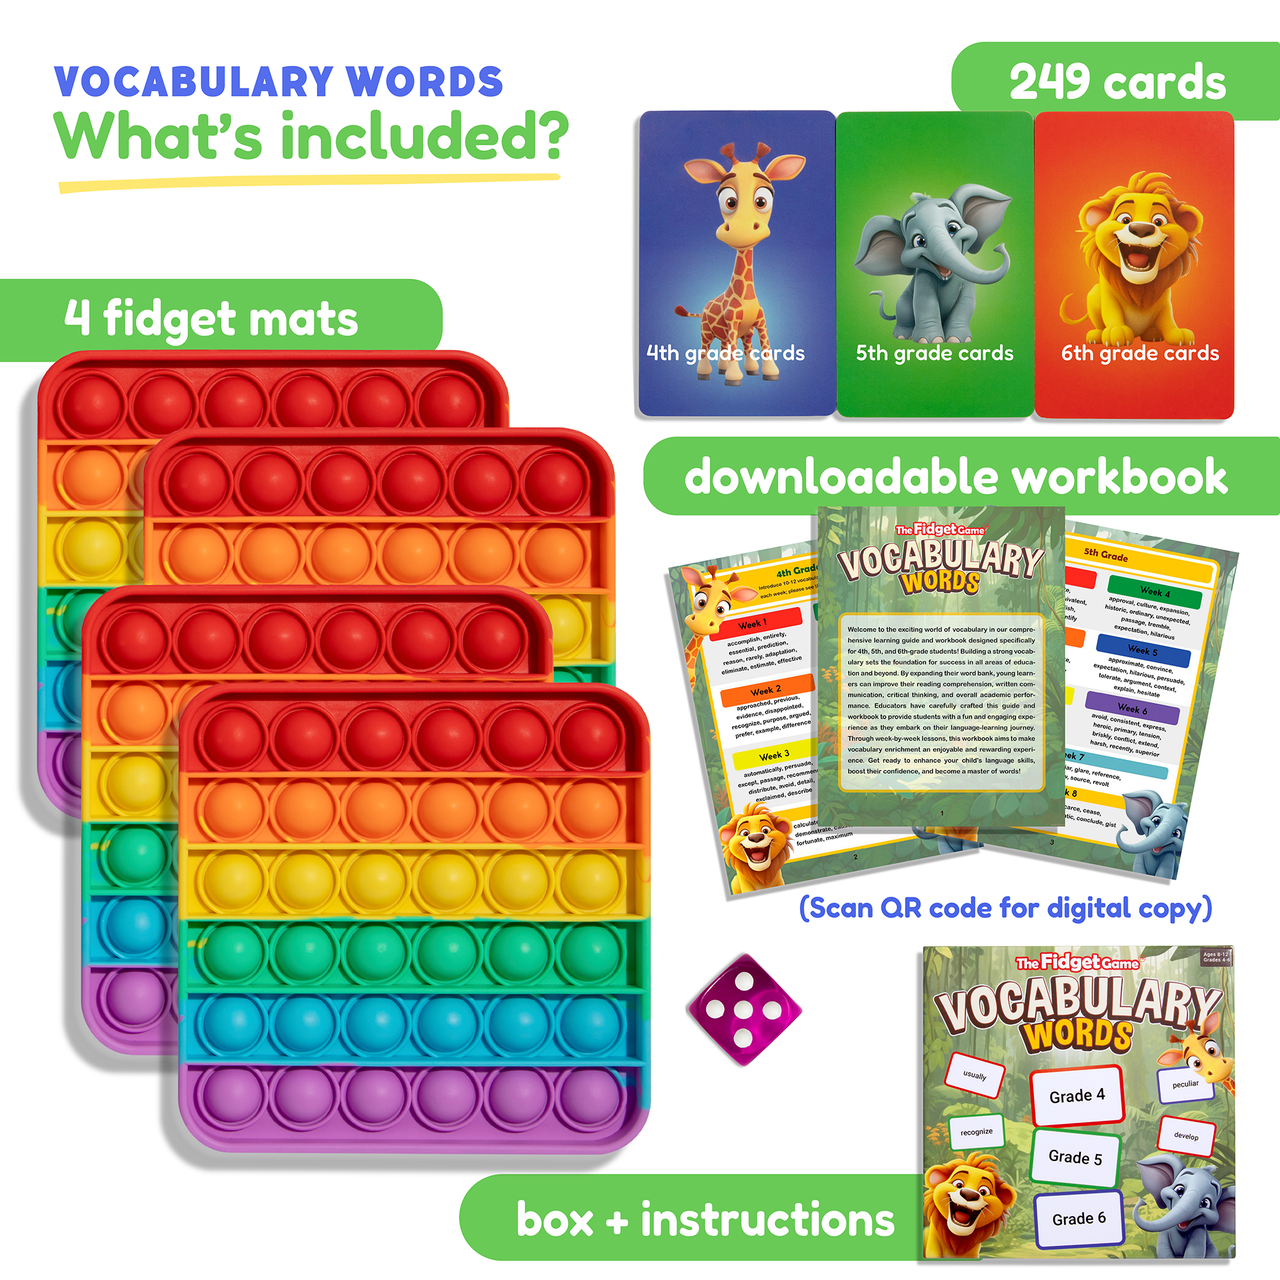 The Vocabulary Game